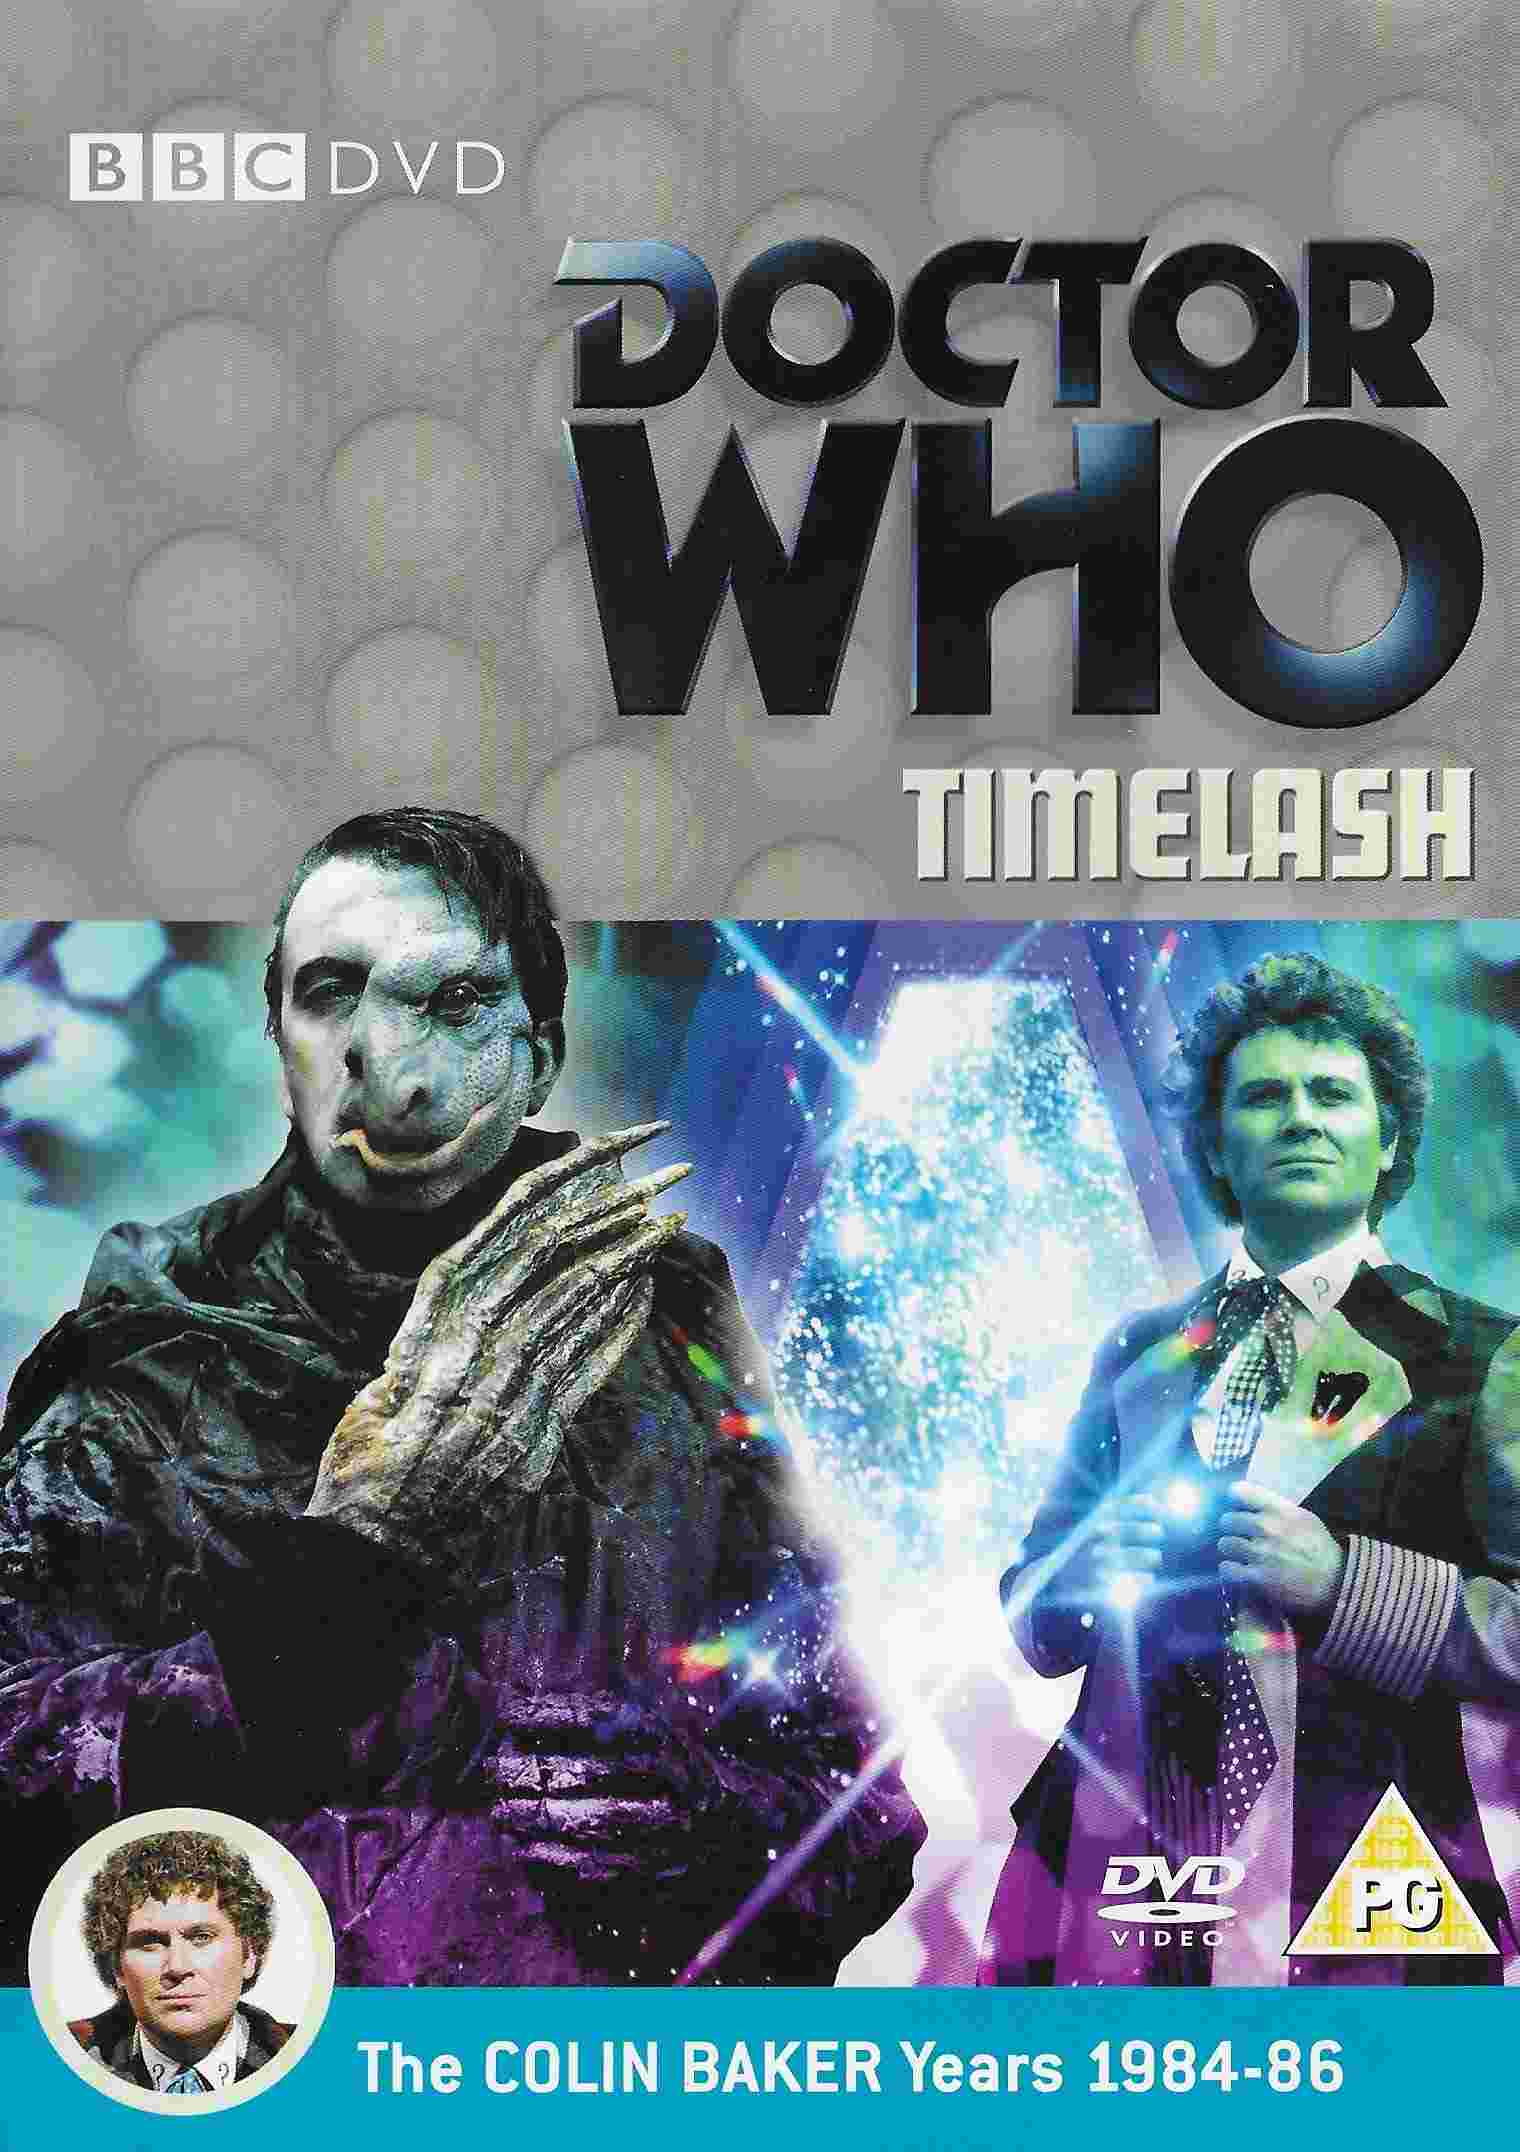 Picture of BBCDVD 2333 Doctor Who - Timelash by artist Glen McCoy from the BBC records and Tapes library